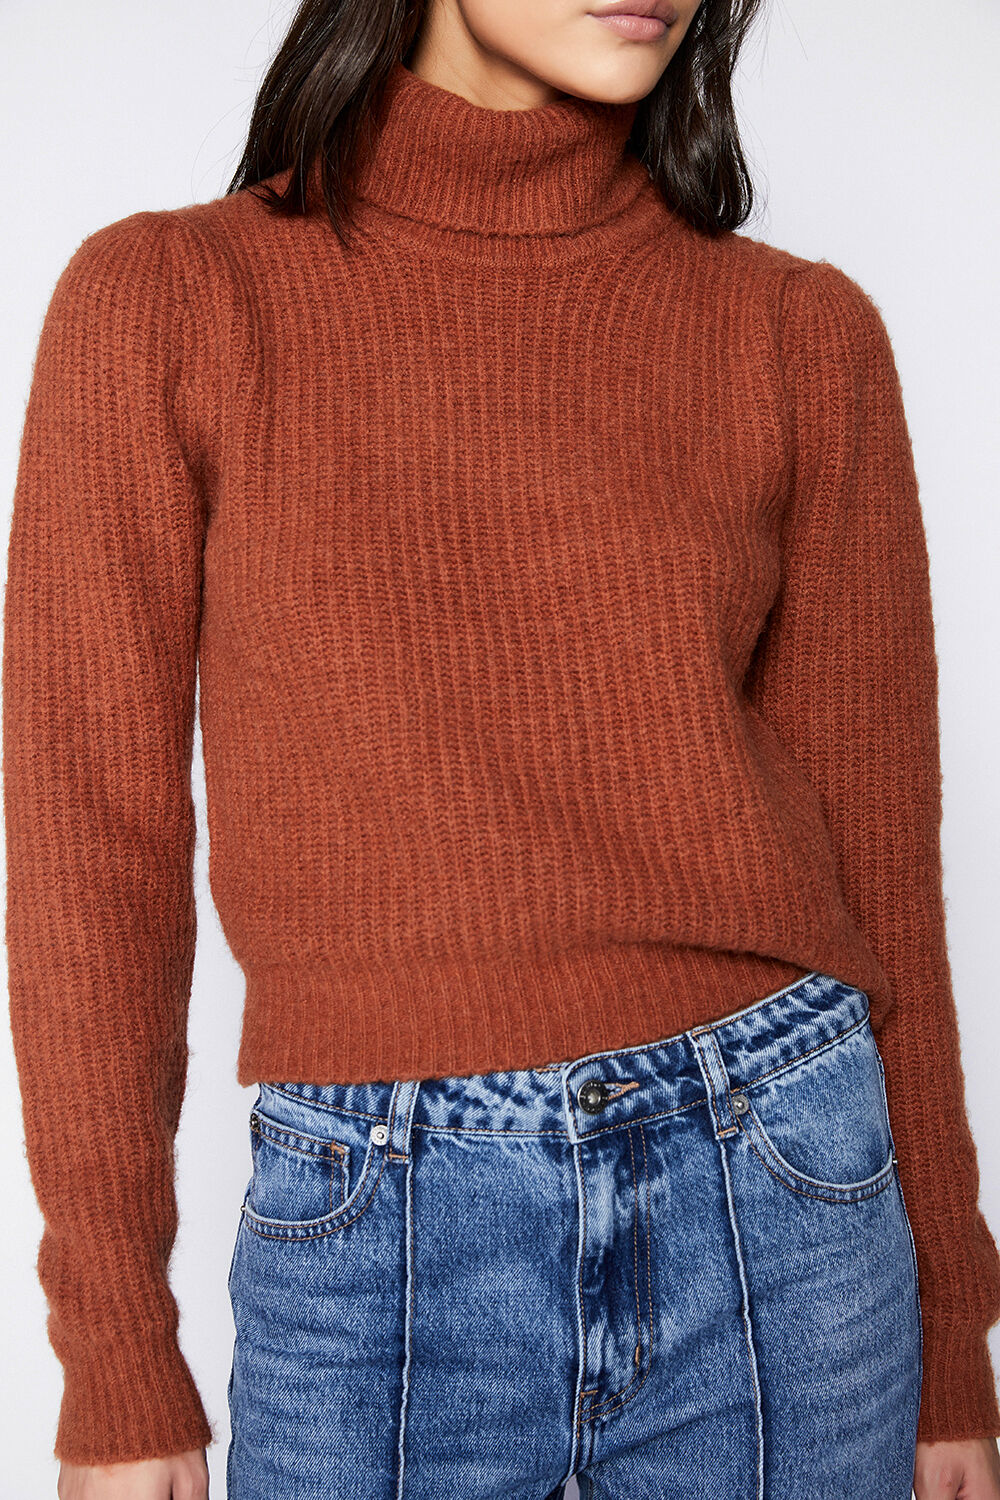 RORY CROP KNIT in colour COPPER BROWN